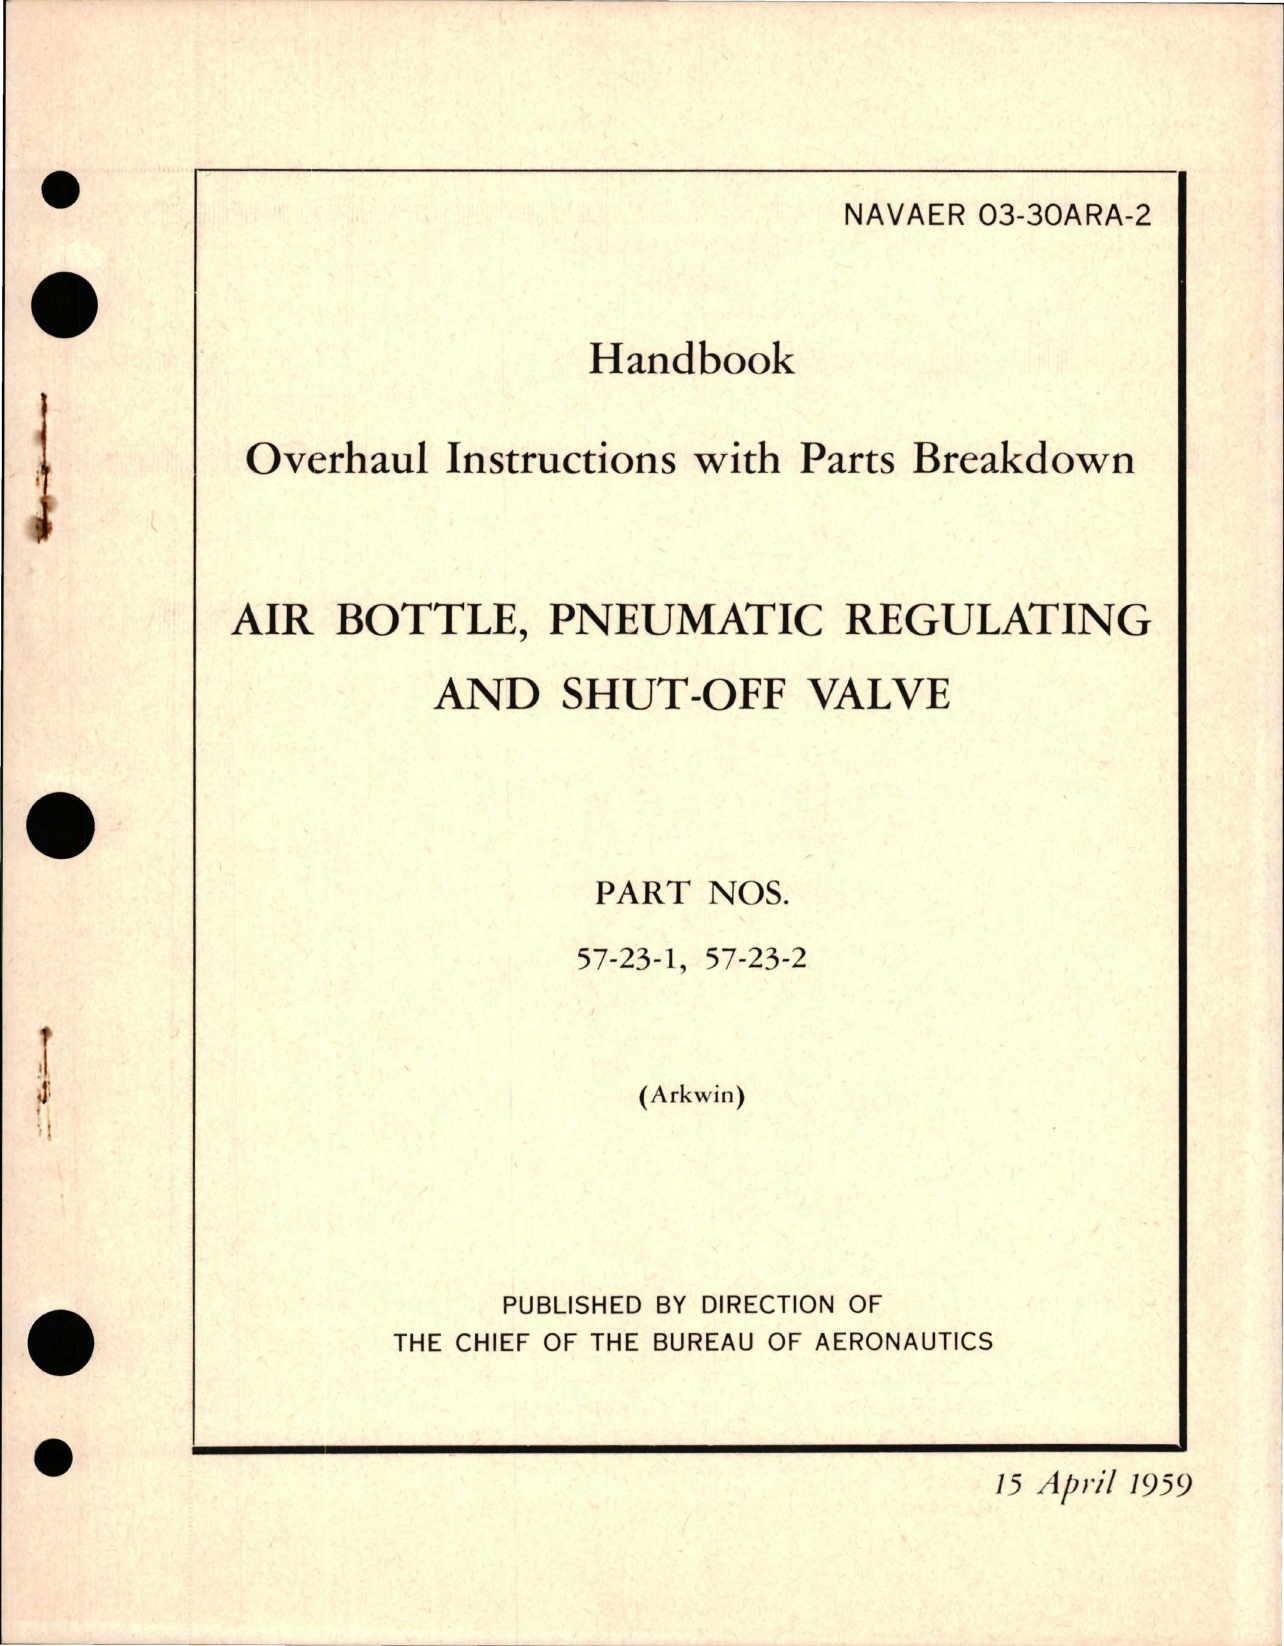 Sample page 1 from AirCorps Library document: Overhaul Instructions with Parts Breakdown for Pneumatic Regulating Air Bottle and Shut-Off Valve - Parts 57-23-1 and 57-23-2 